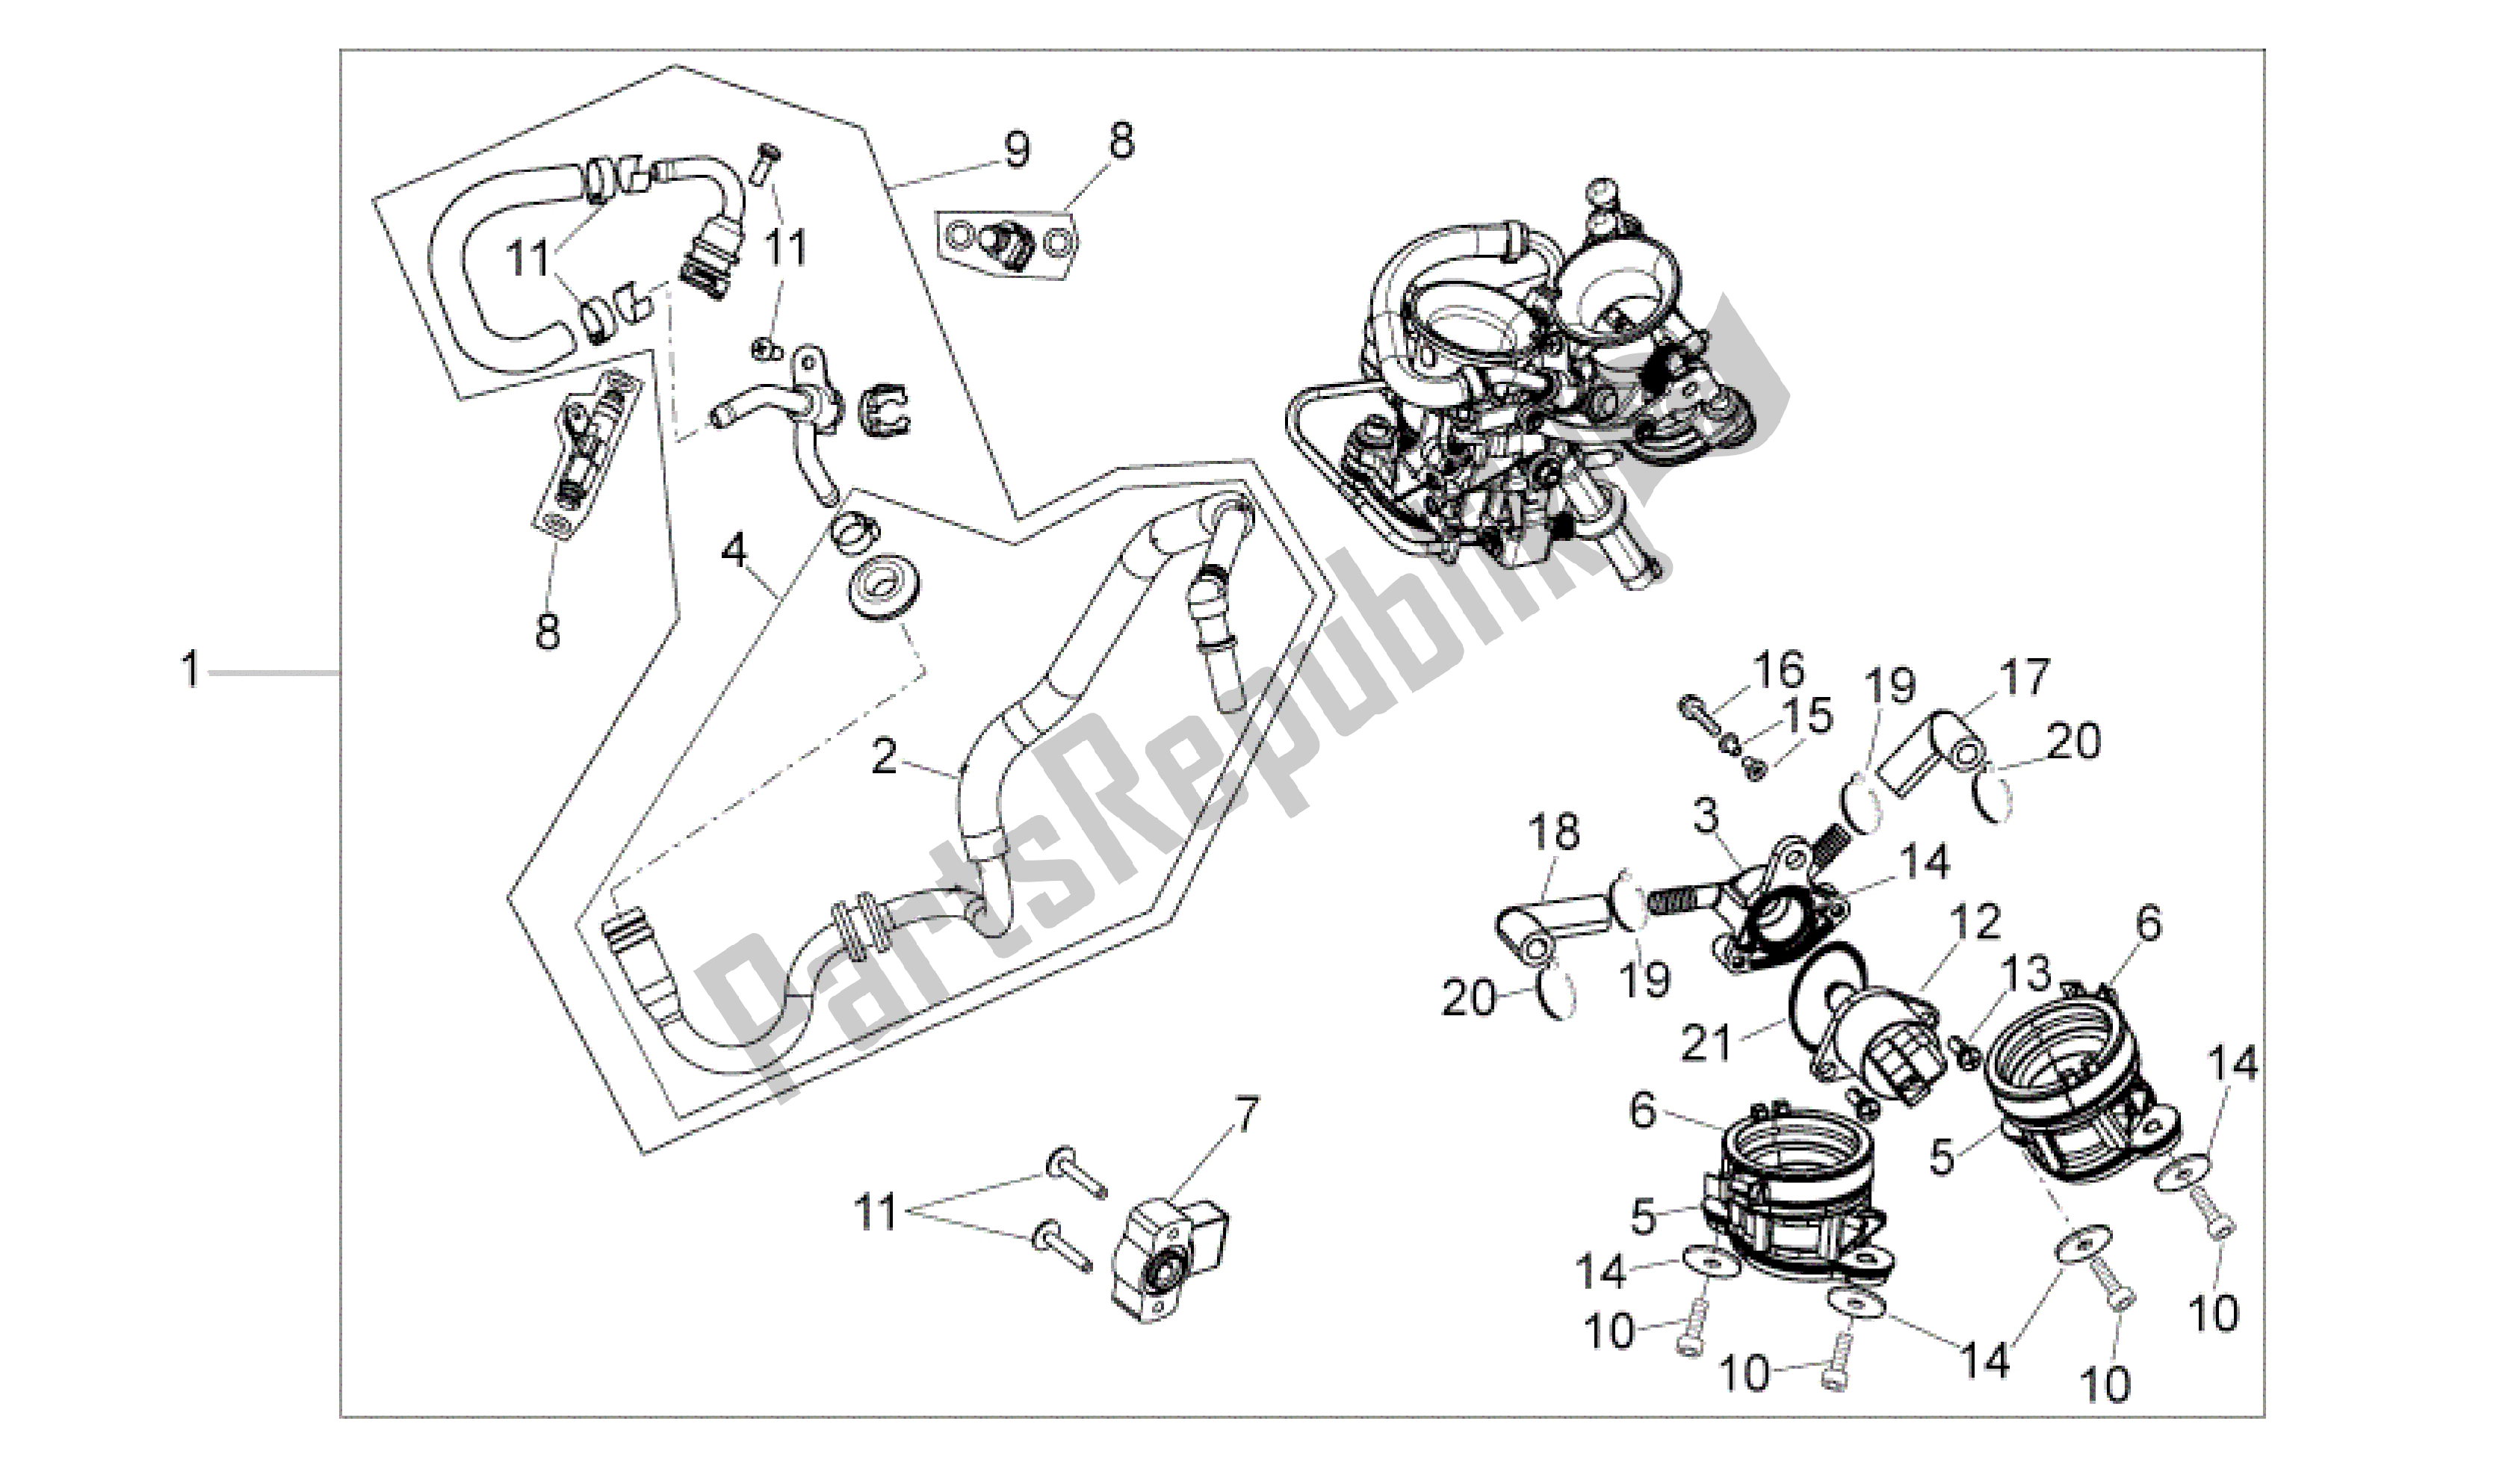 All parts for the Throttle Body of the Aprilia MXV 450 2008 - 2010